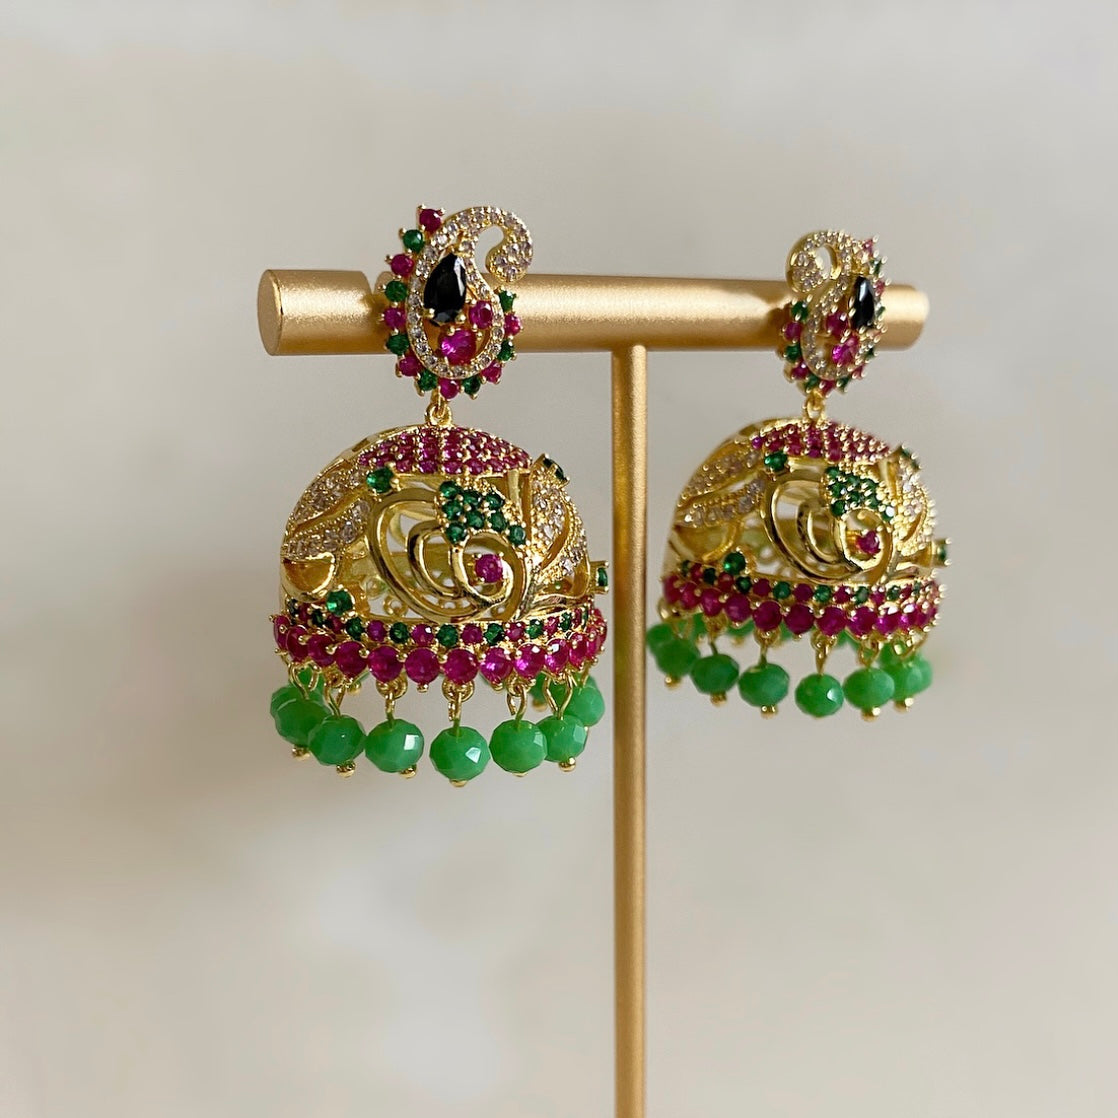 Our Mini Paisley Jhumki Earrings boast a beautiful paisley design with shimmering crystal zirconia and rich, vivid colours to add a touch of style and sparkle to any outfit. Perfect for any occasion, they will bring out the best in any outfit.  Earring drop 4cm 